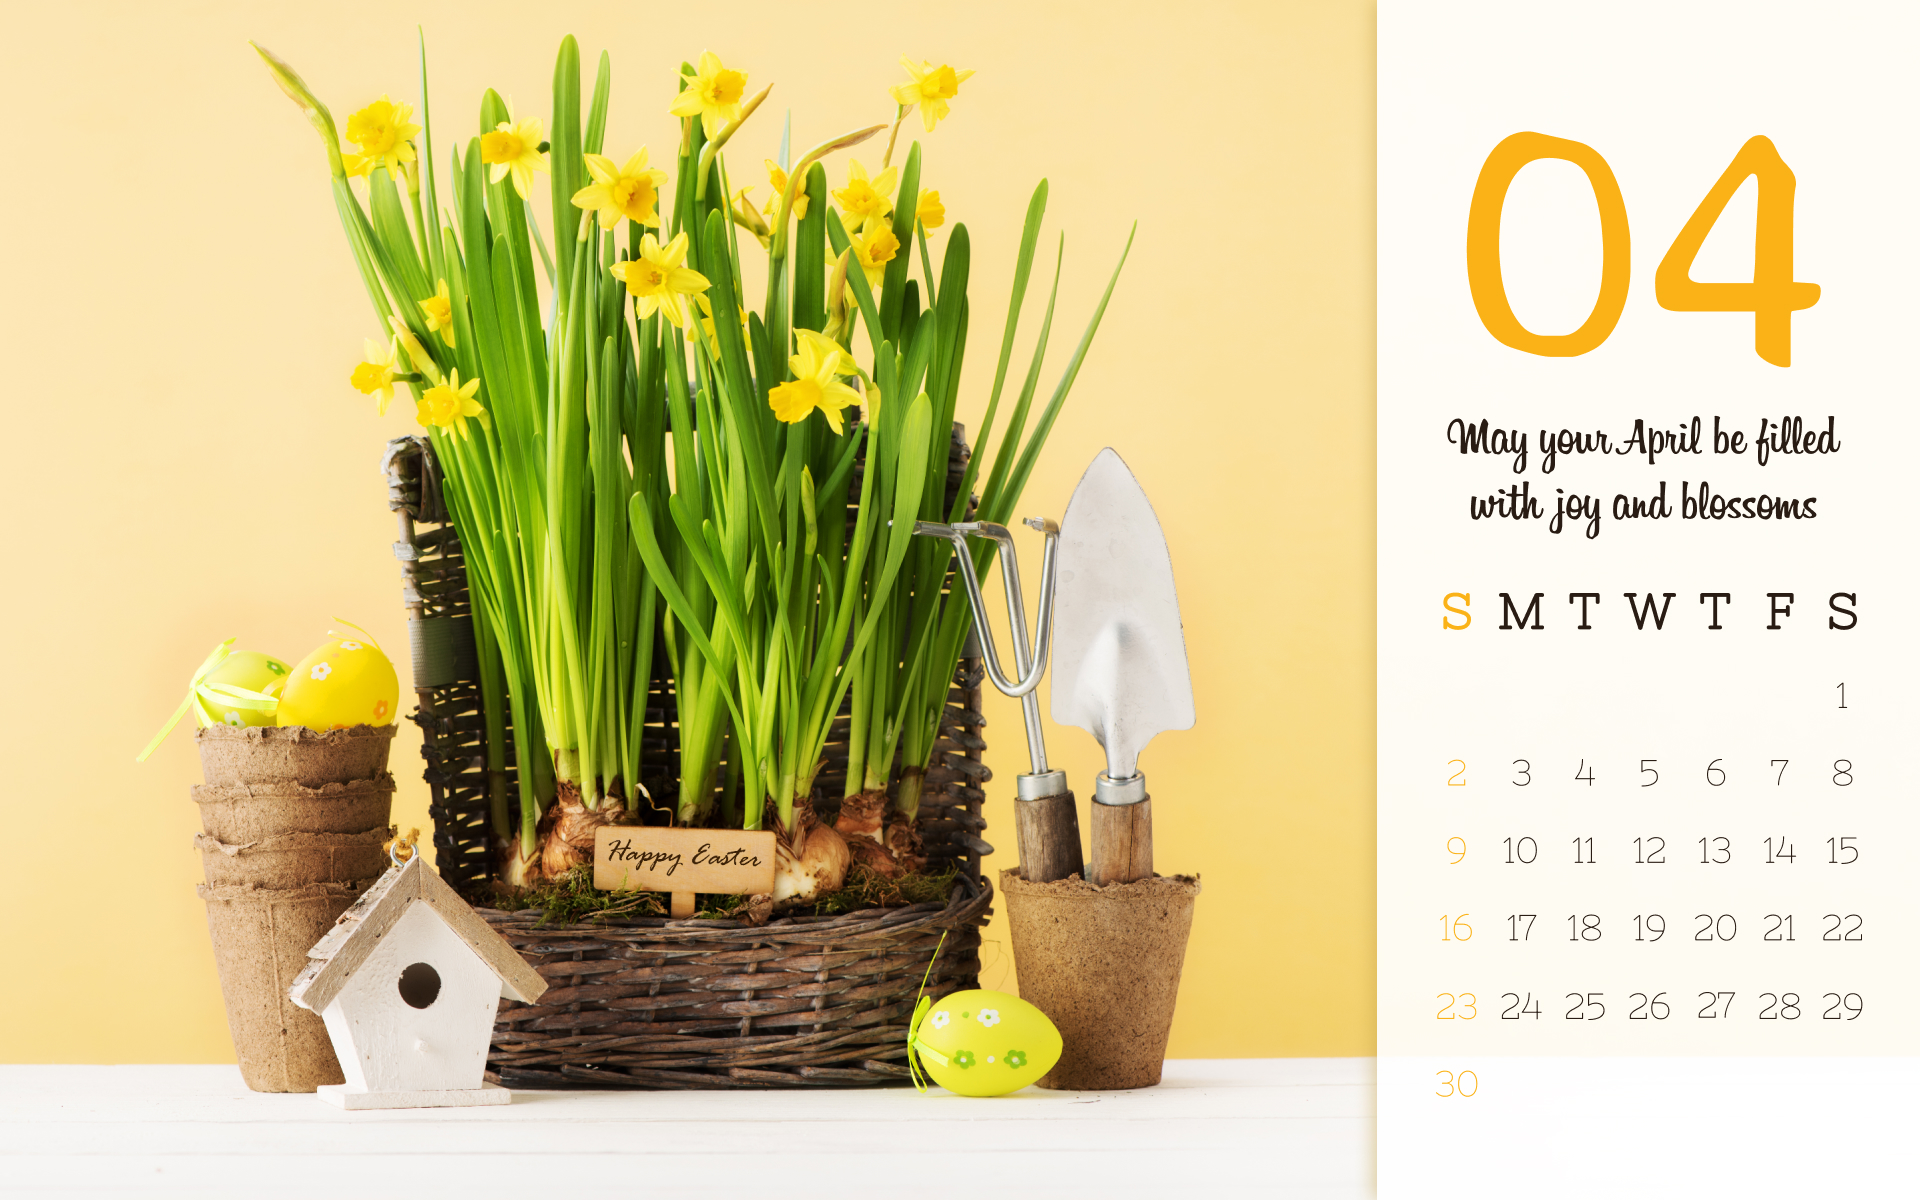 Calendar with a basket of daffodils and a birdhouse.